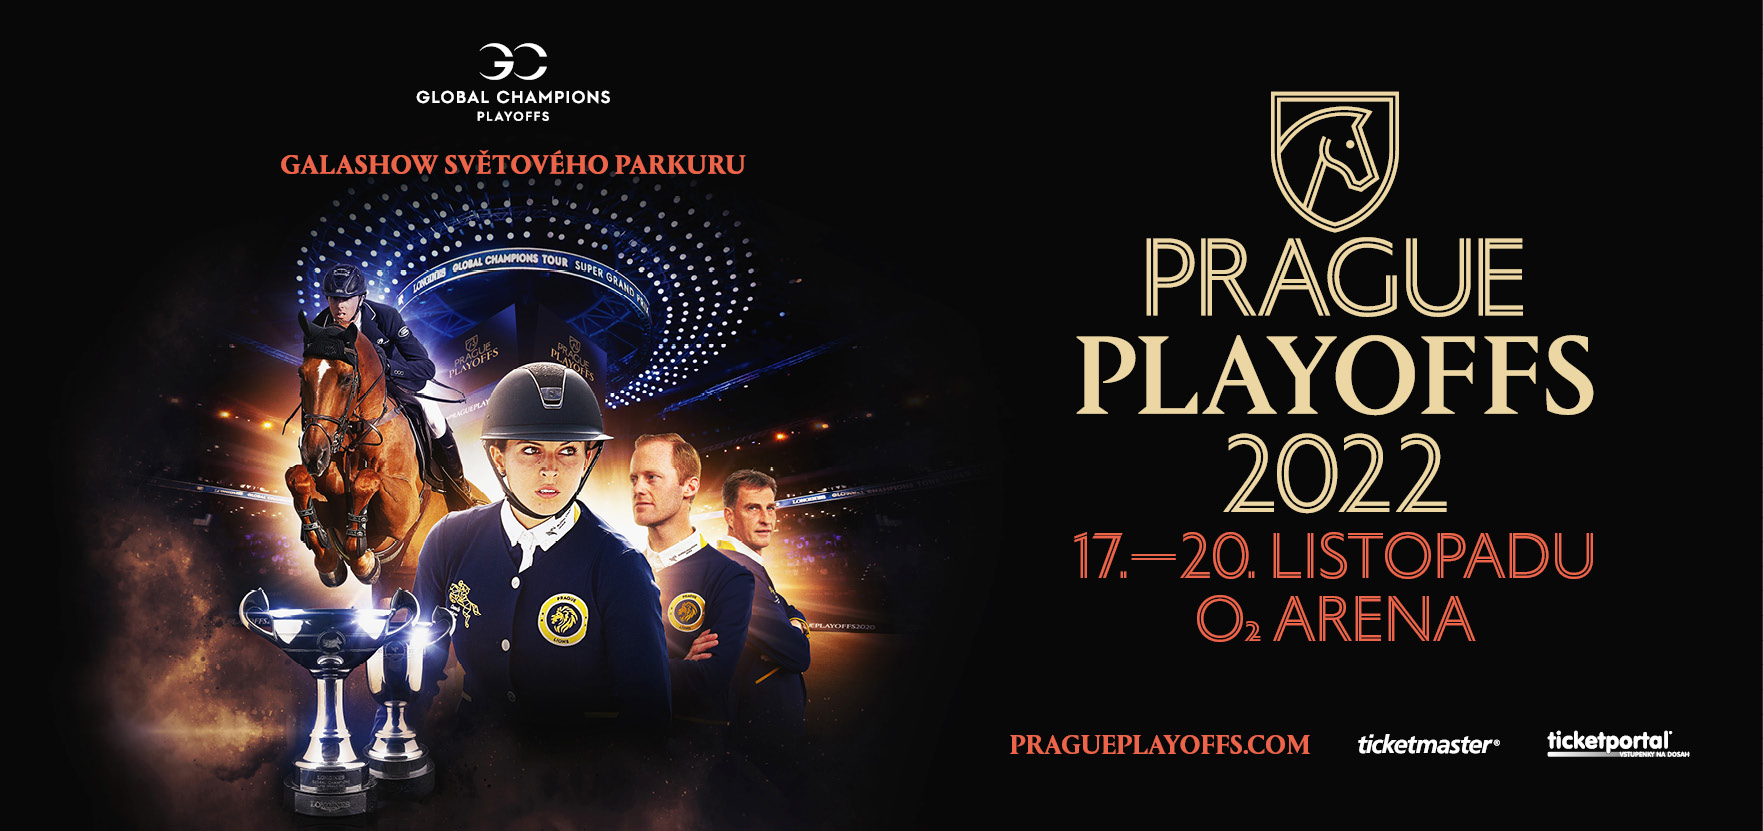 Thumbnail # Tickets for the Prague Playoffs 2022 go on sale on December 1st